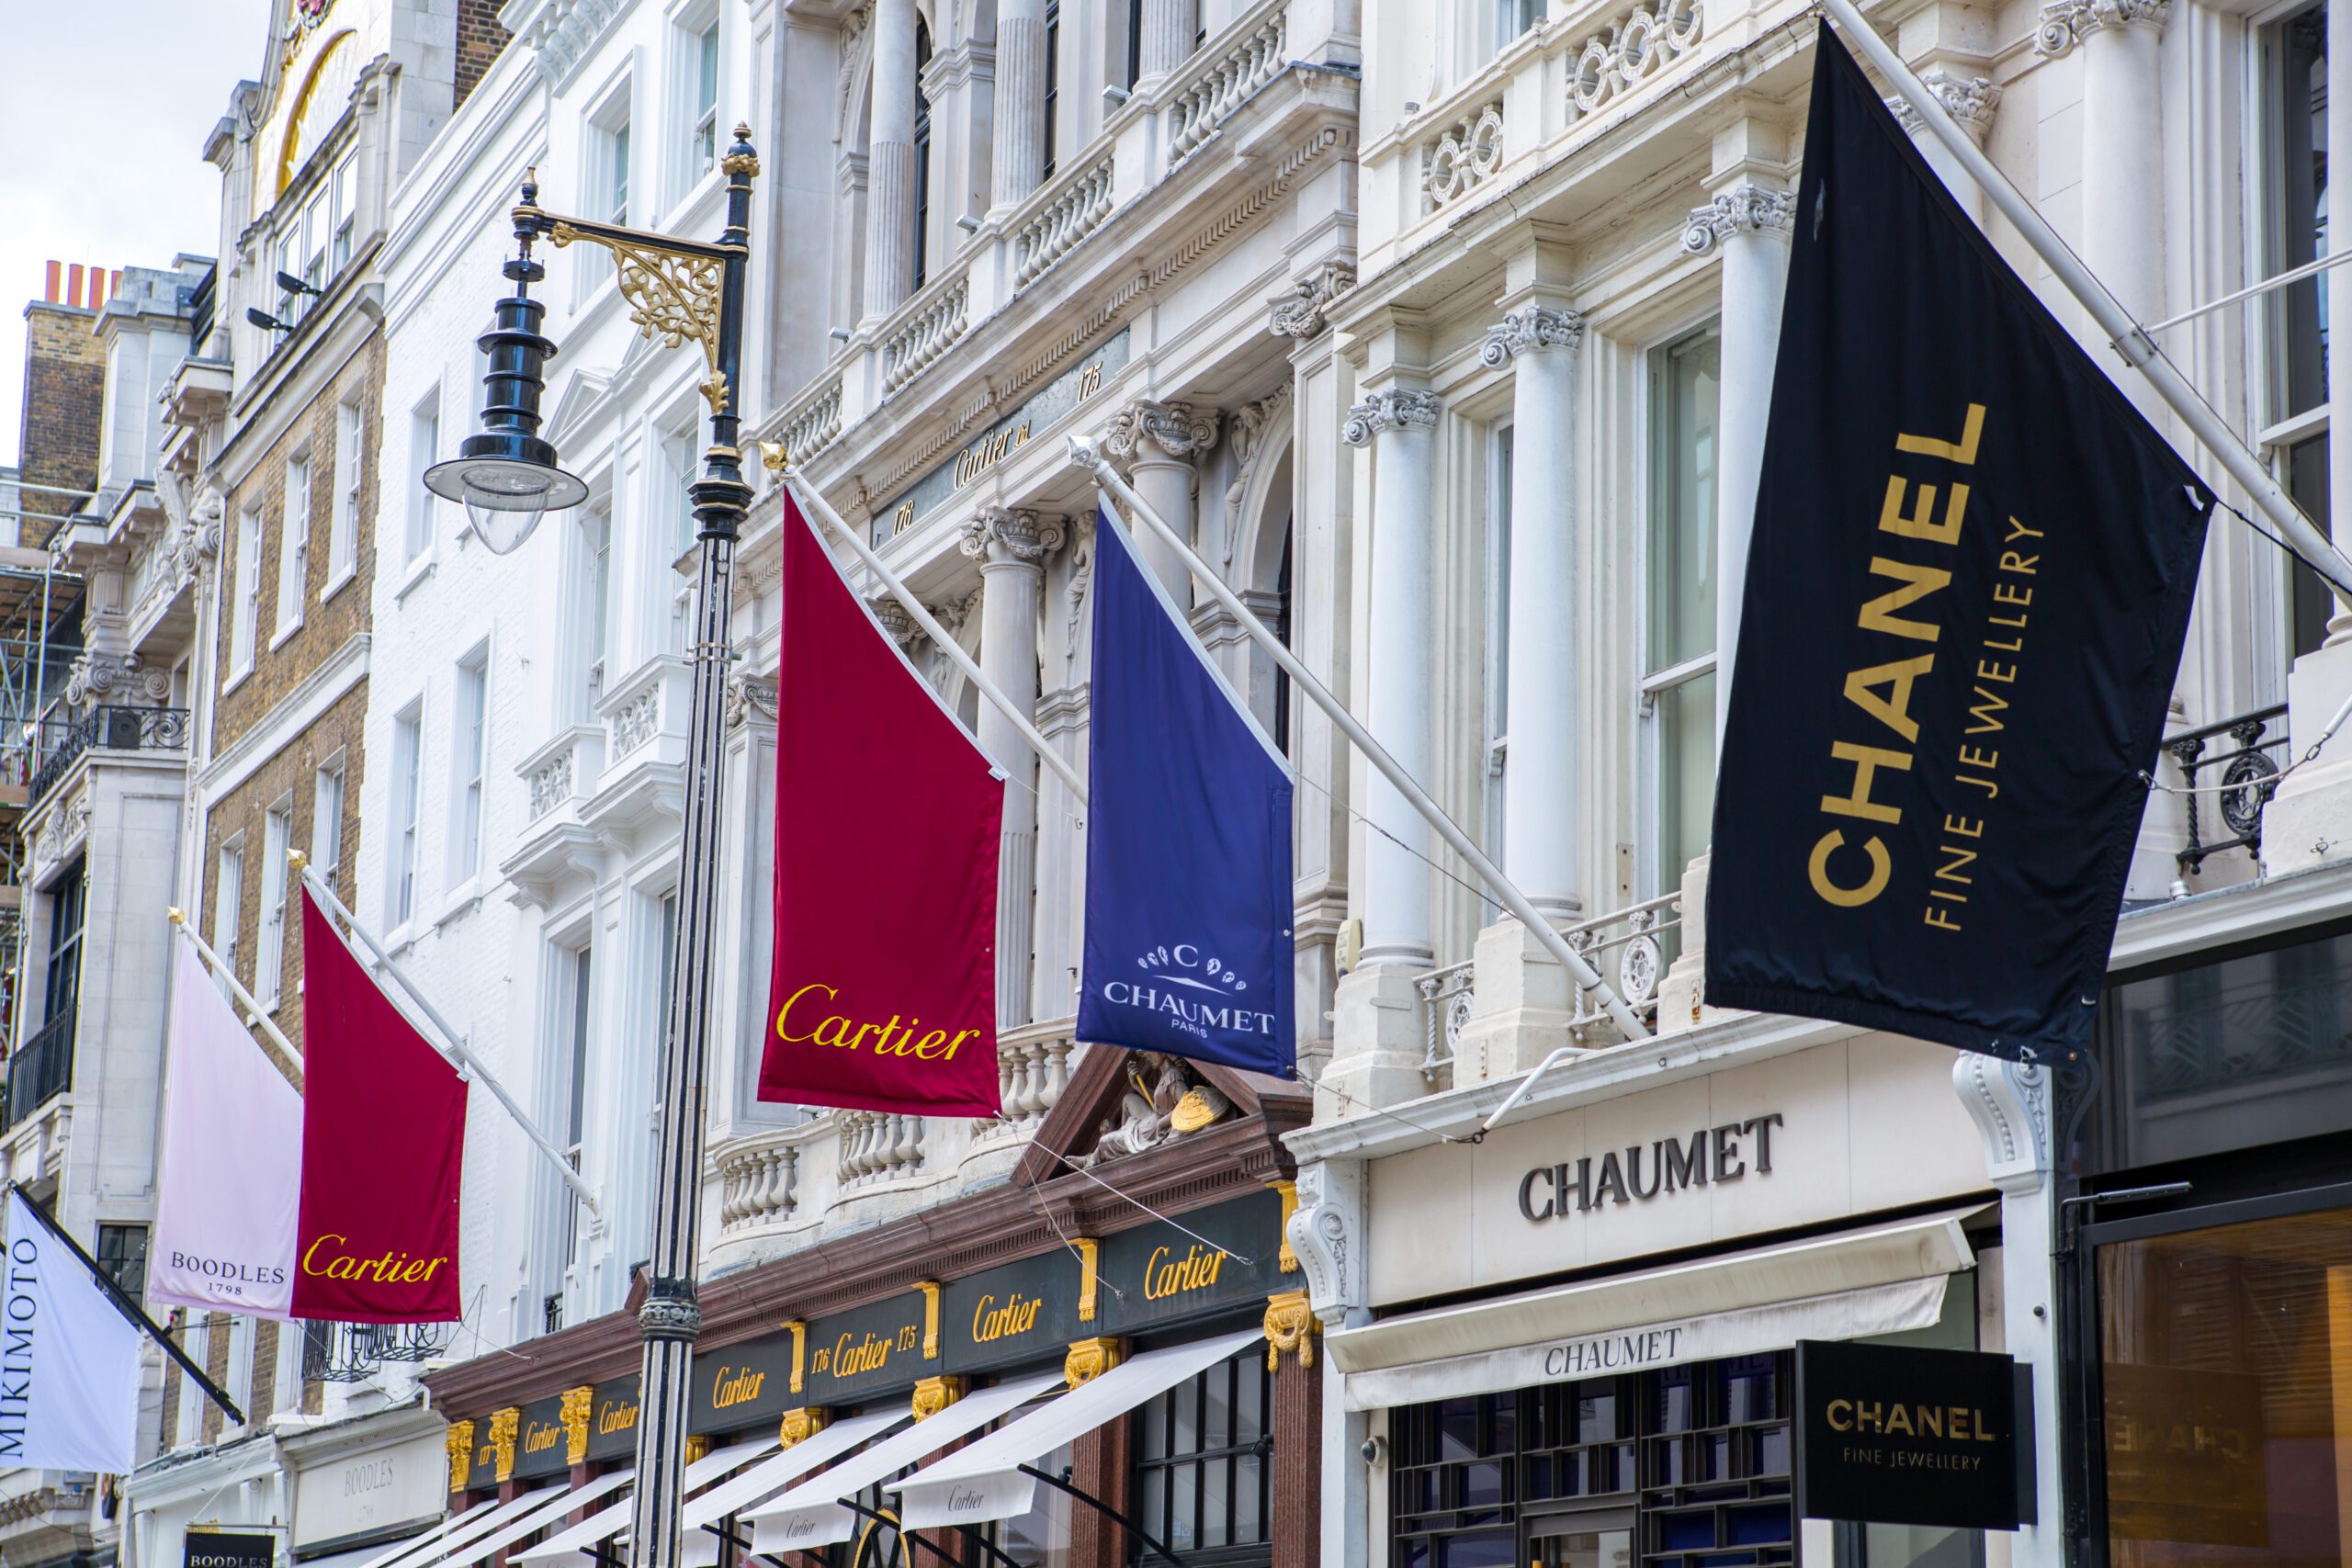 London, UK - August 13, 2019: Old Bond street view with flags of famous fashion houses. Bond Street is a major shopping street in the West End of London for luxury designer brands